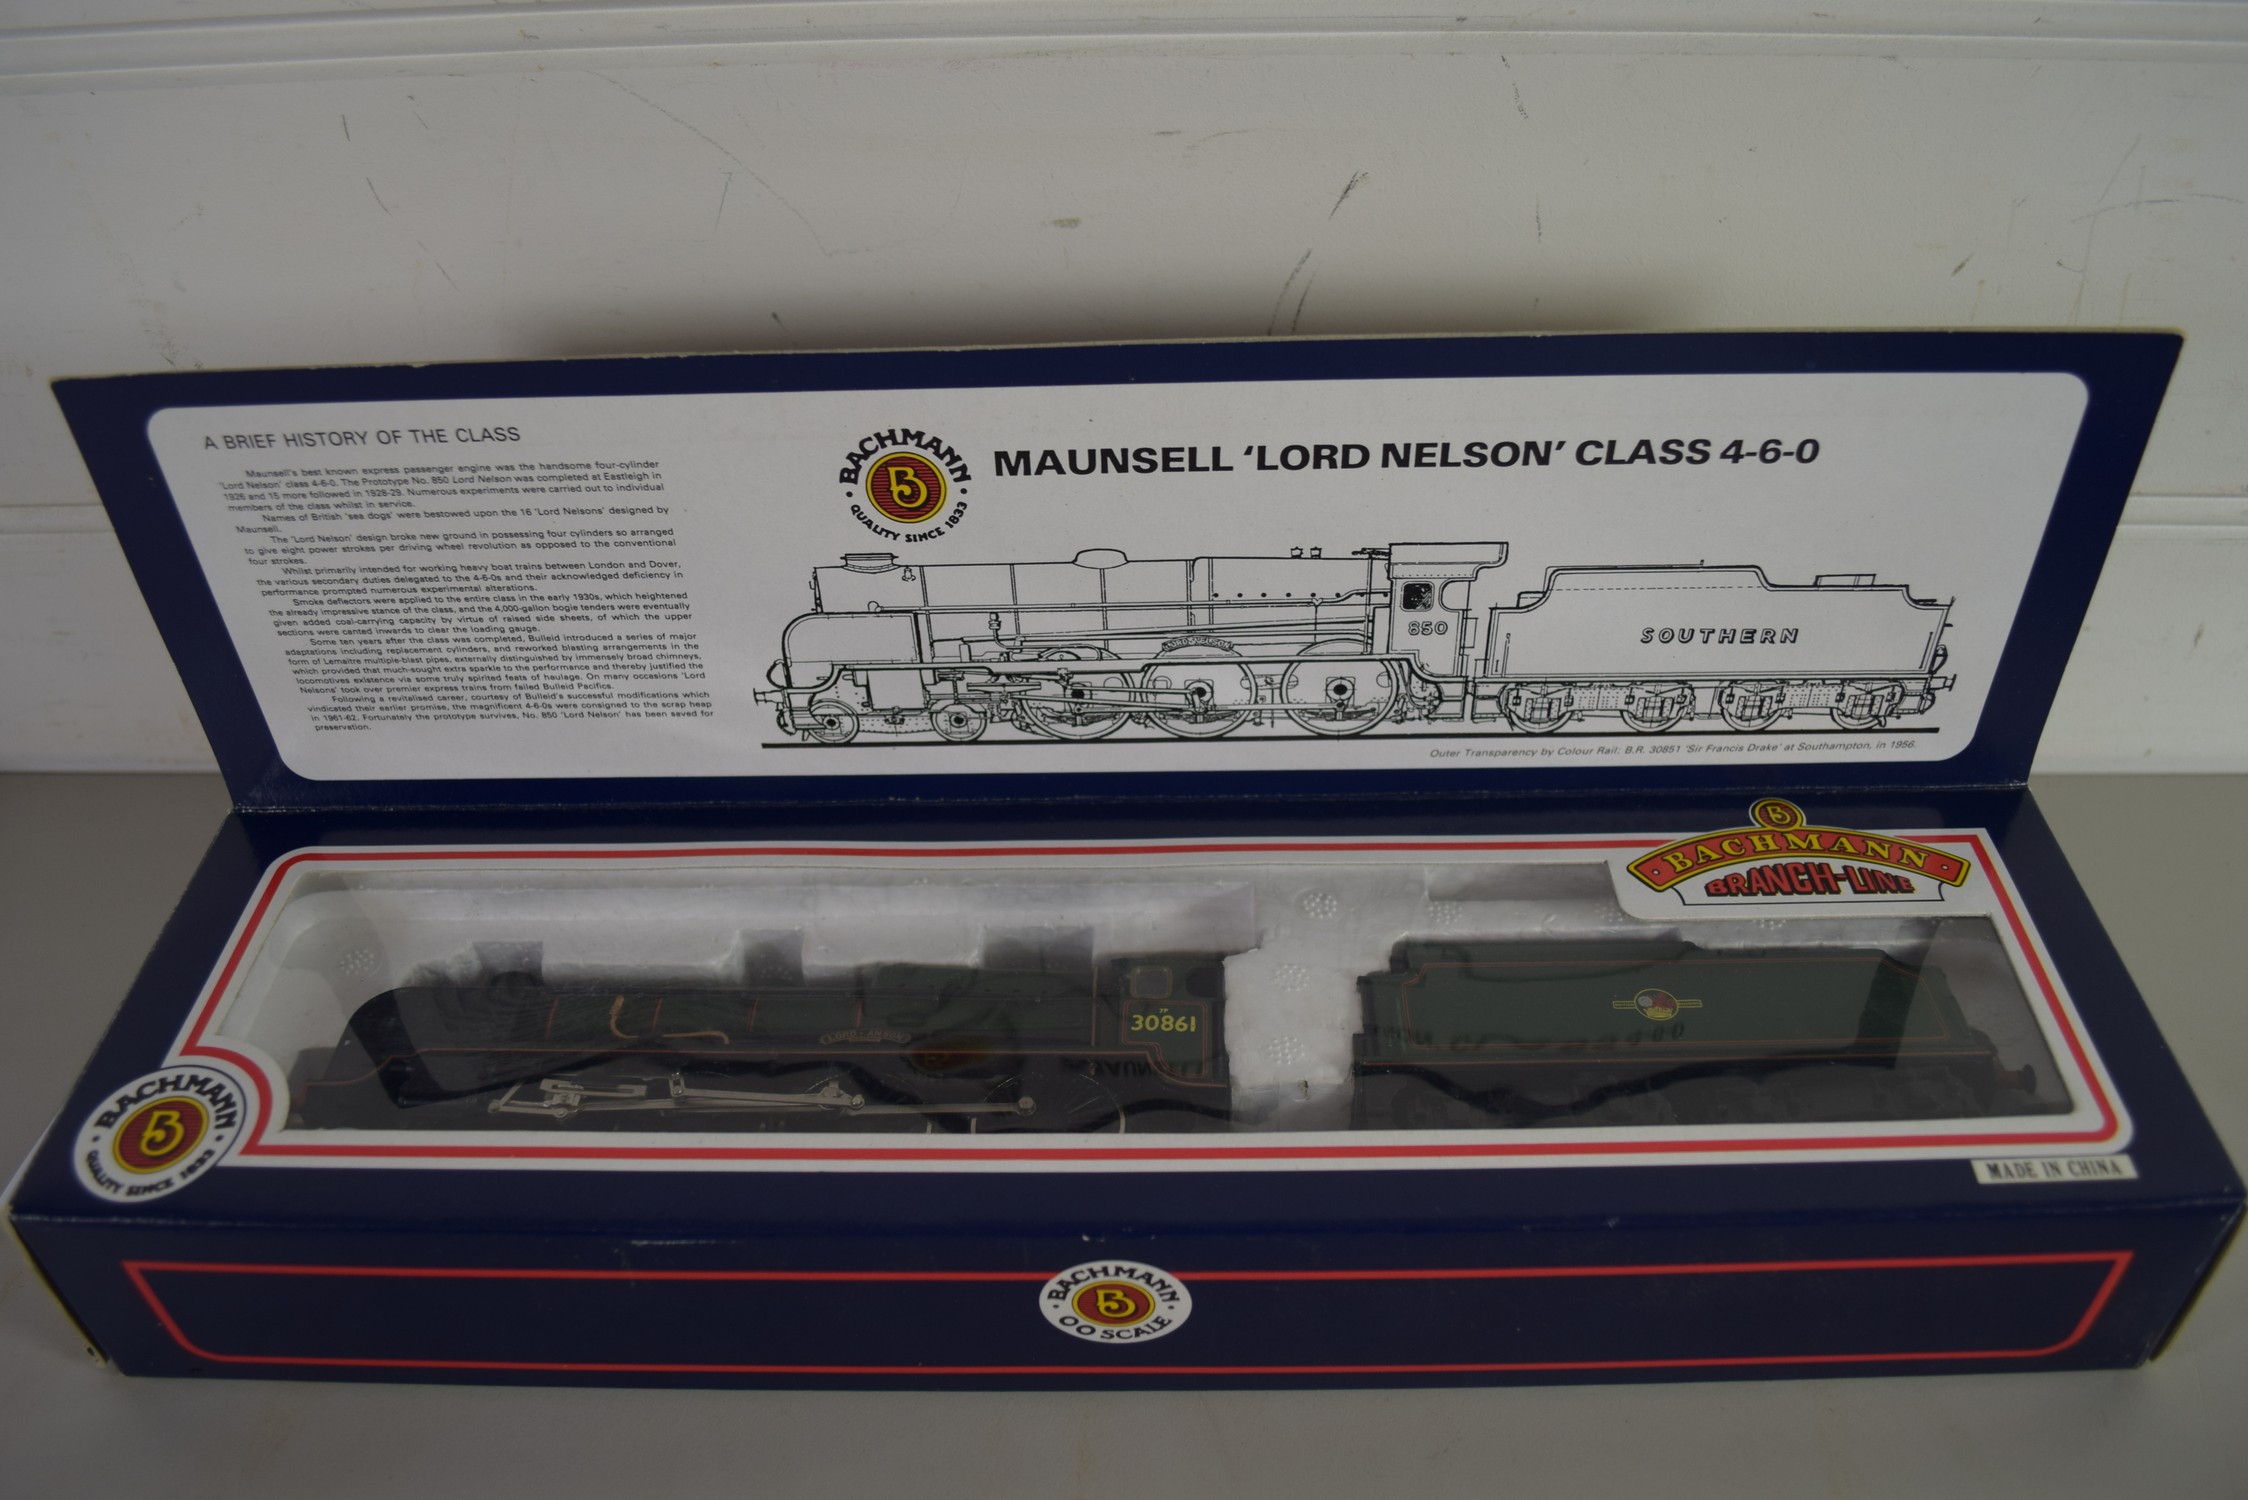 Boxed Bachmann 00 gauge 31-403 Lord Nelson "Lord Anson" BR green, No 30861 locomotive